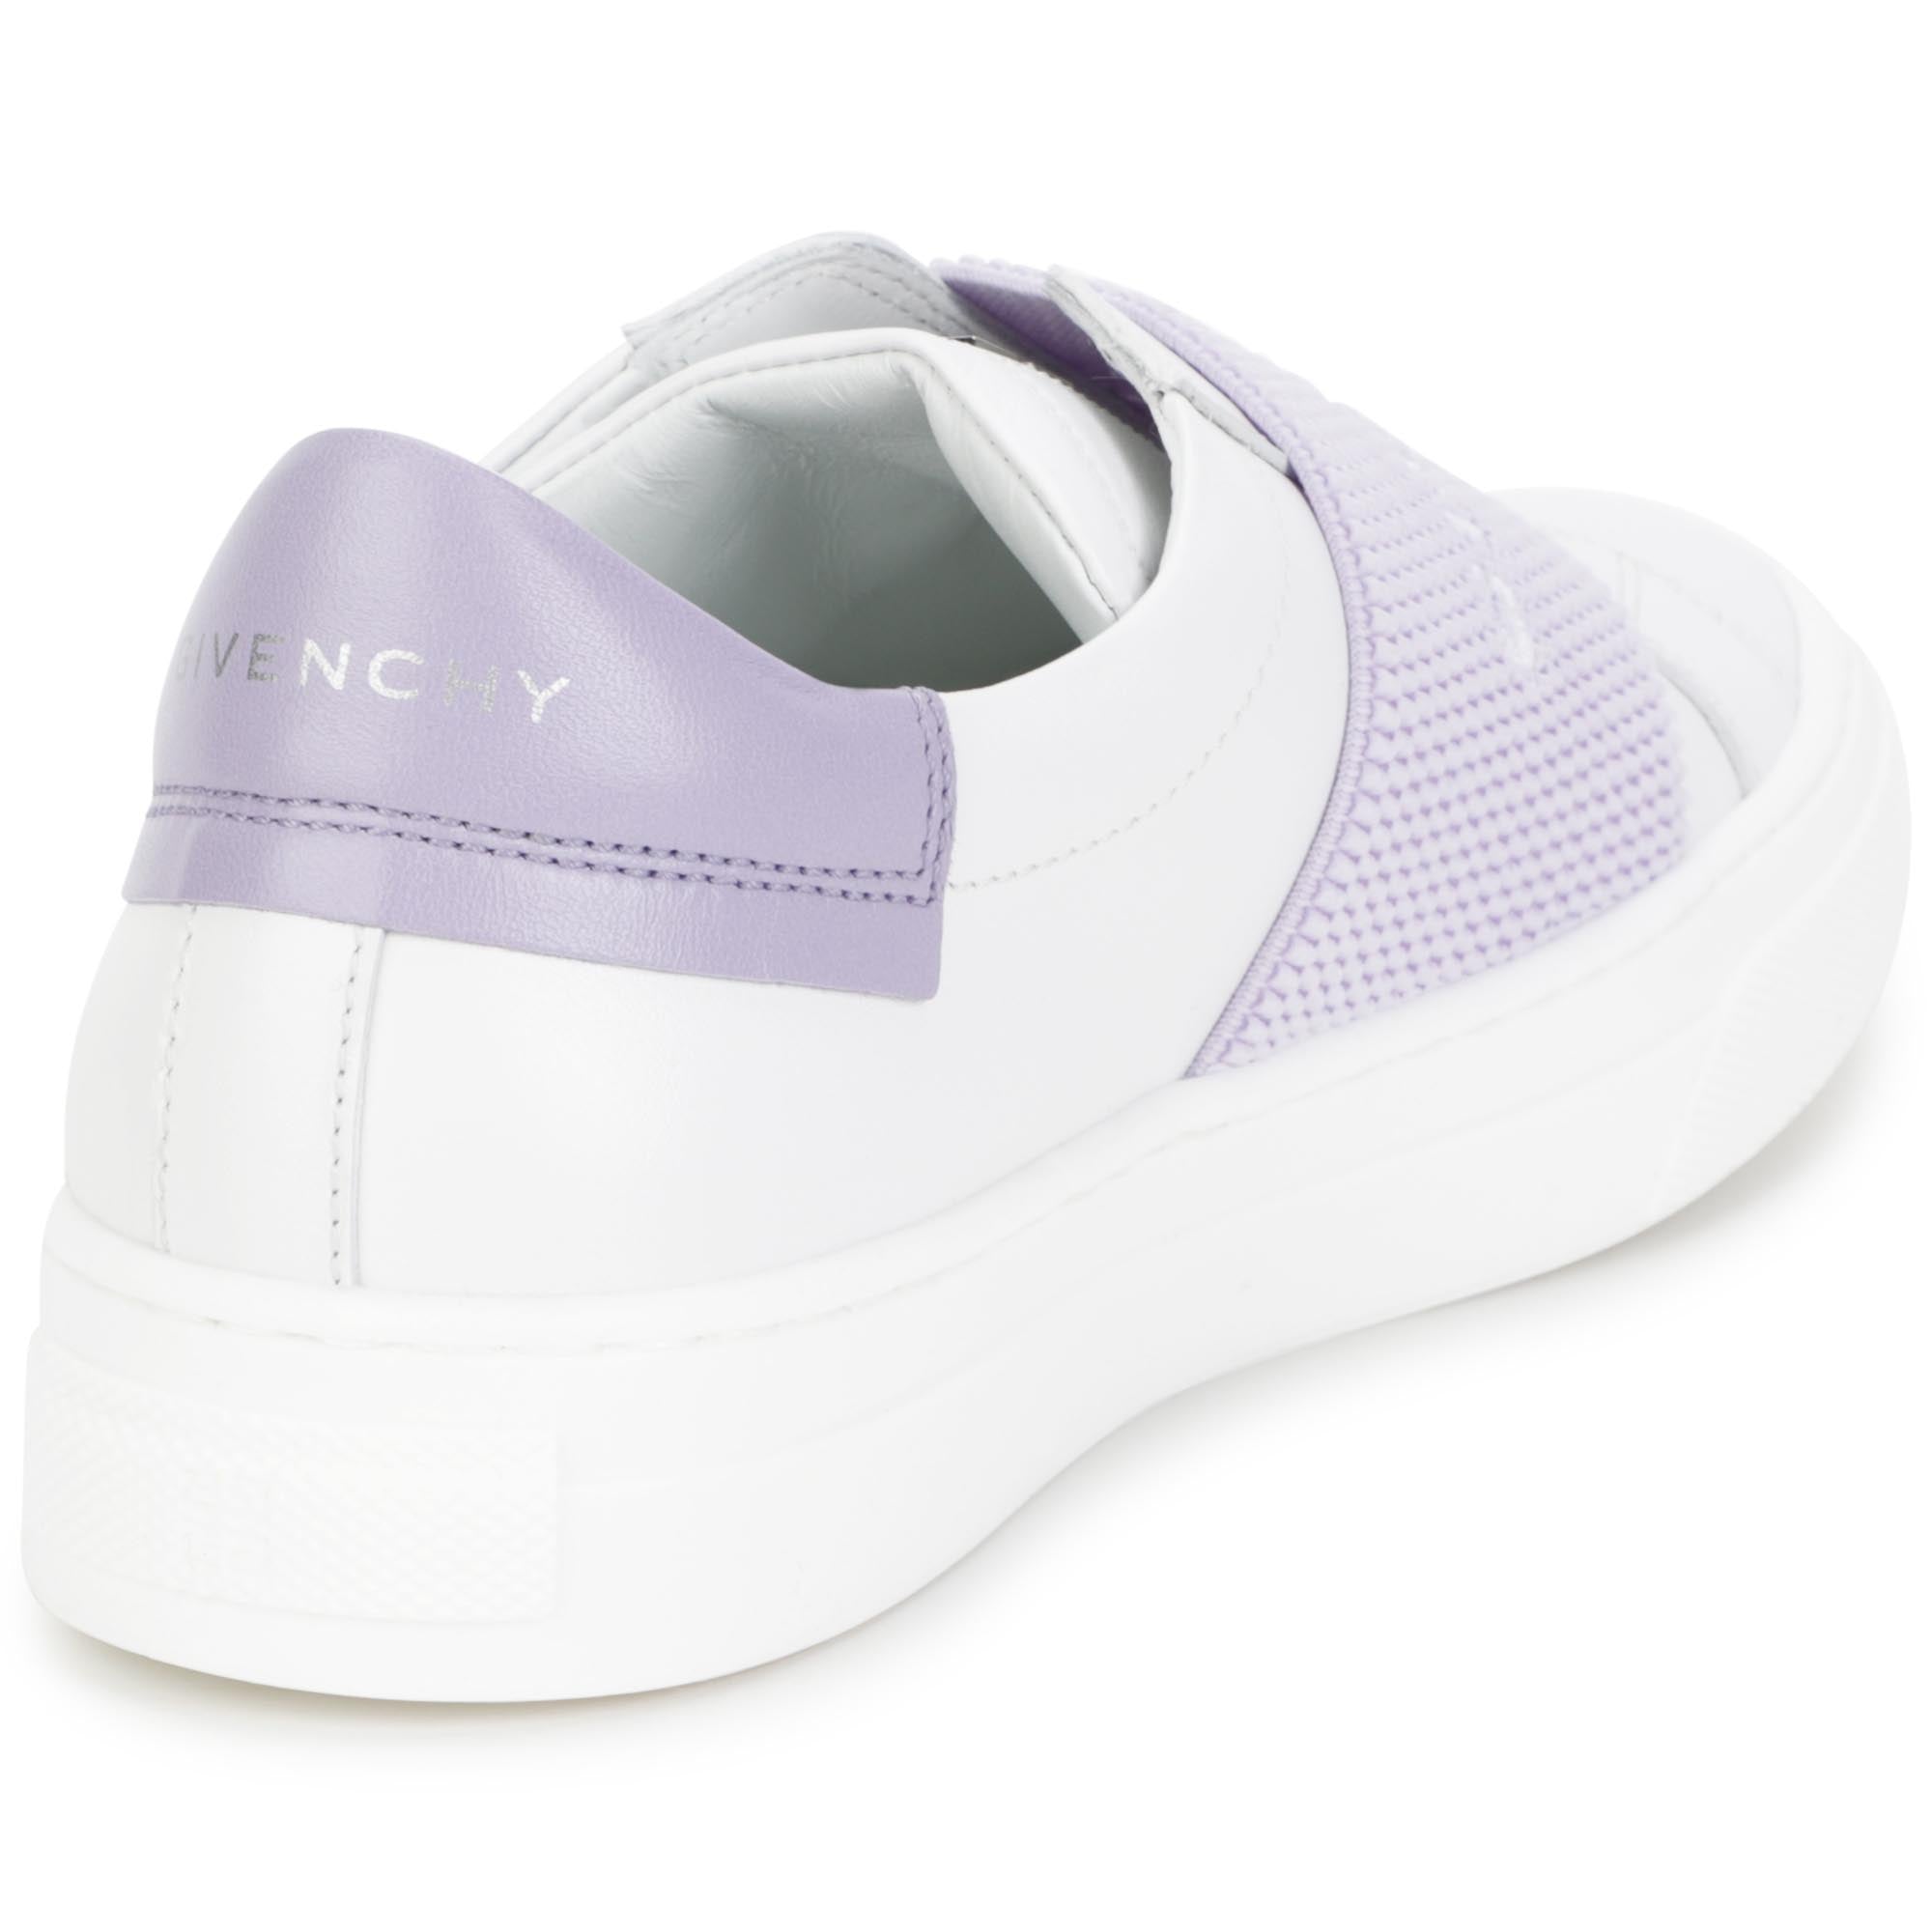 Givenchy White and Lavender Sneakers